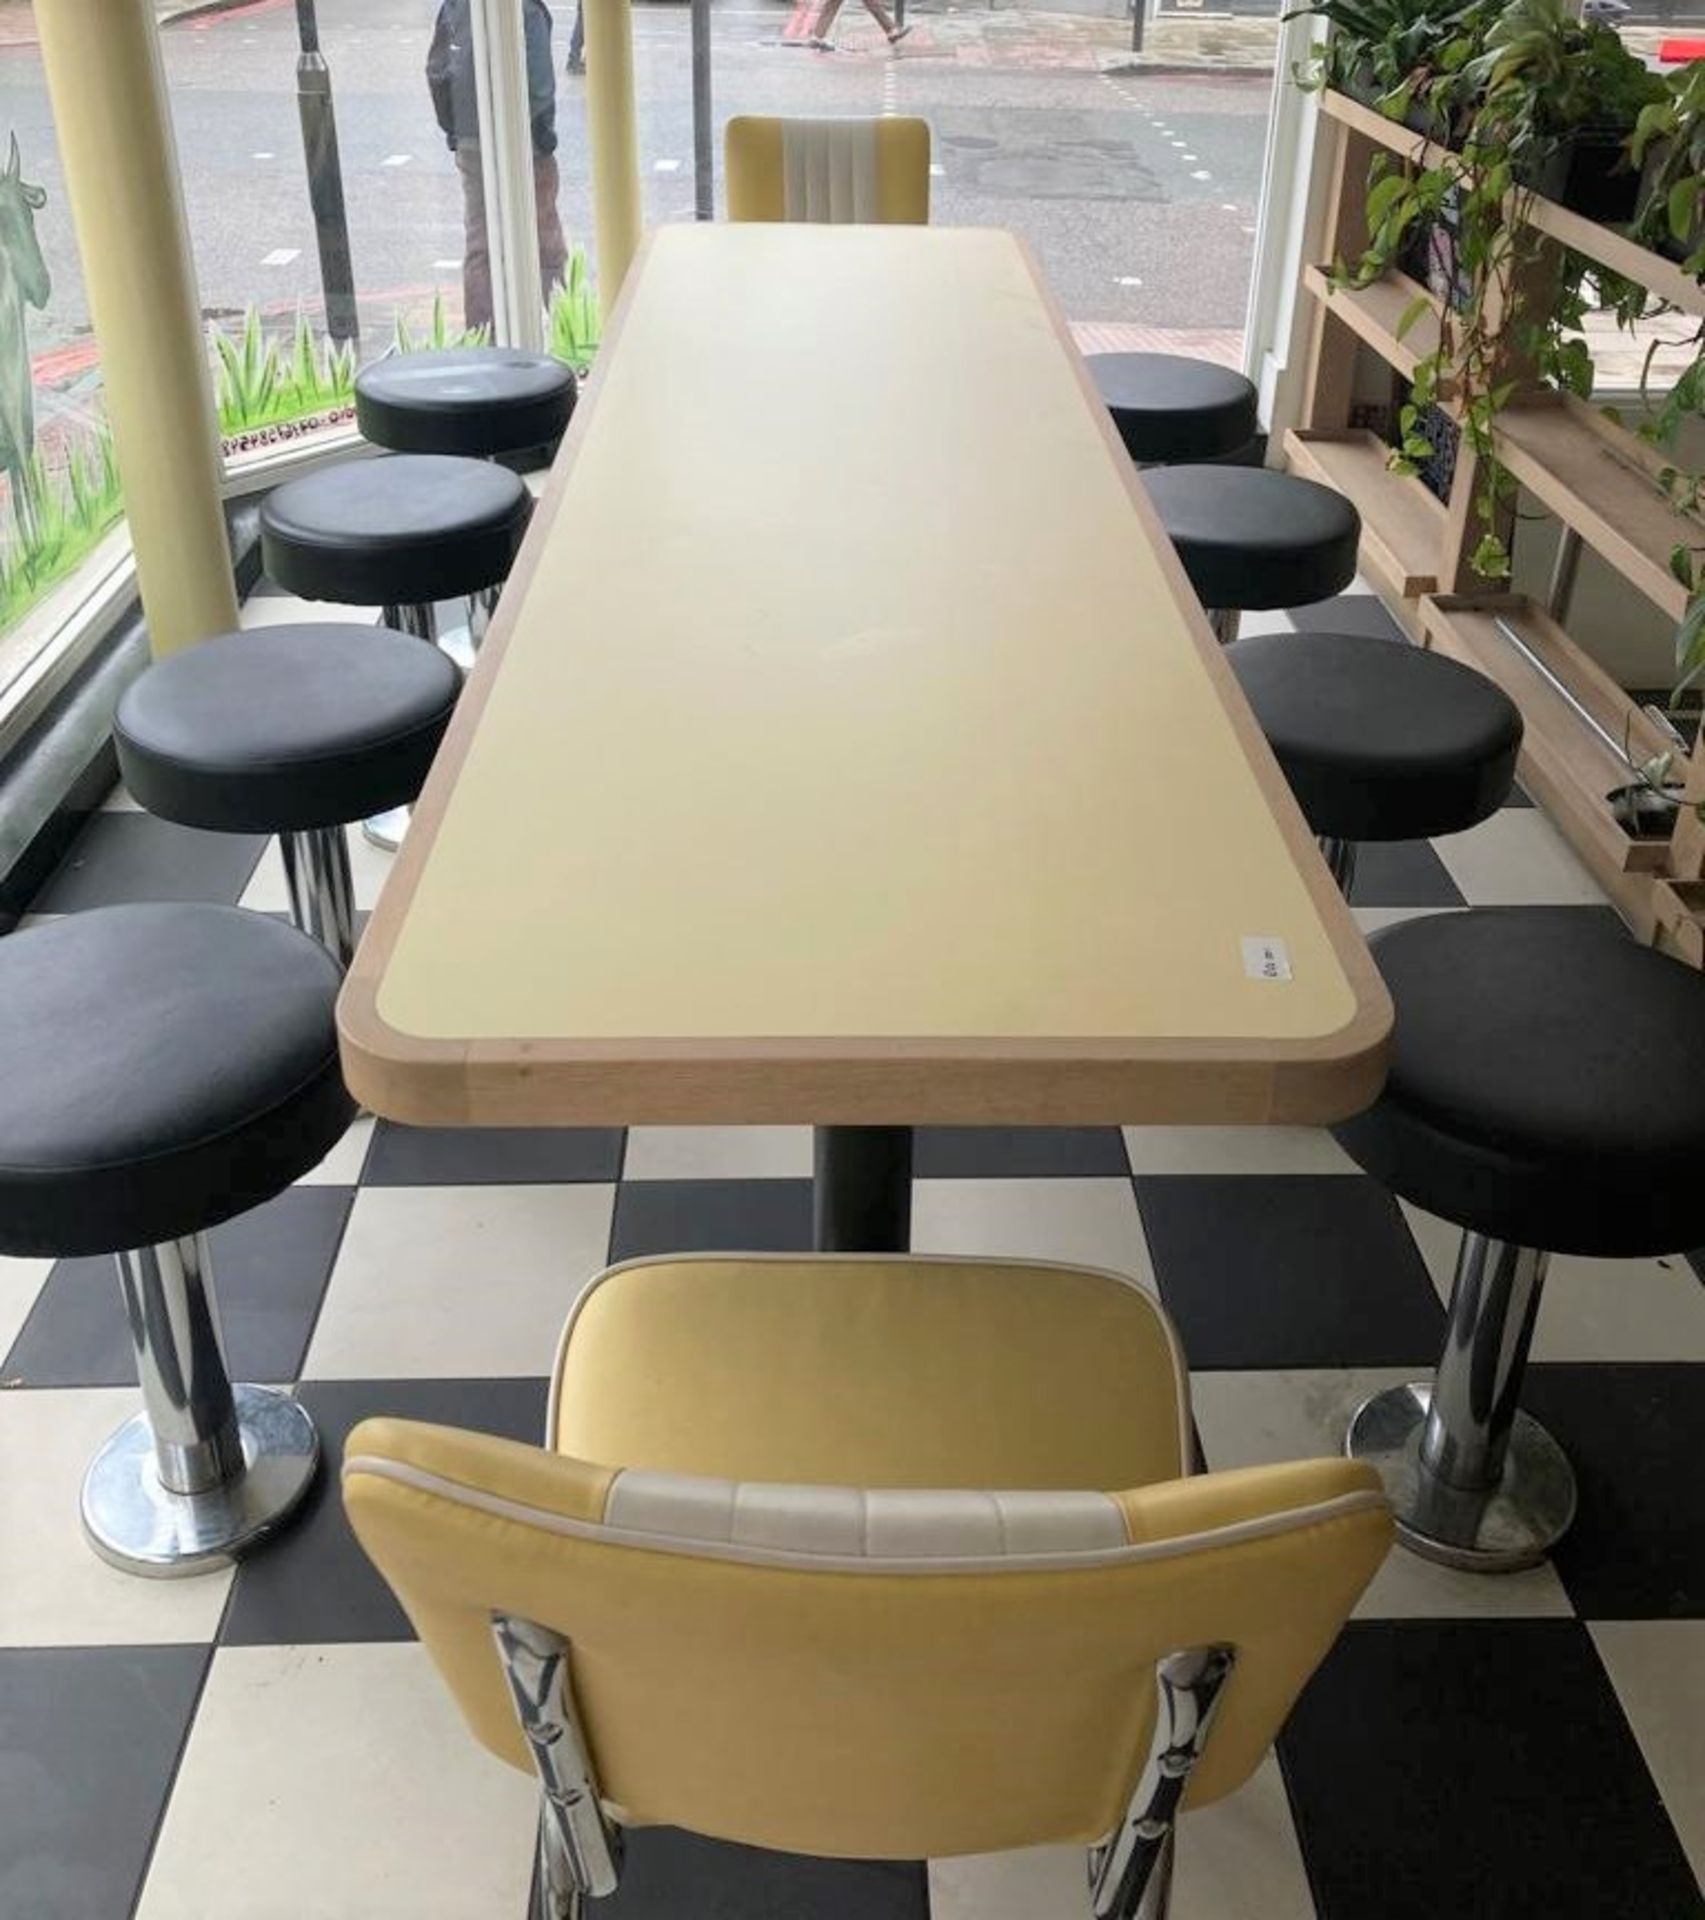 1 x Restaurant Banqueting Table With Lemon Finish, Light Wood Surround & Floor Mounted Pedestals